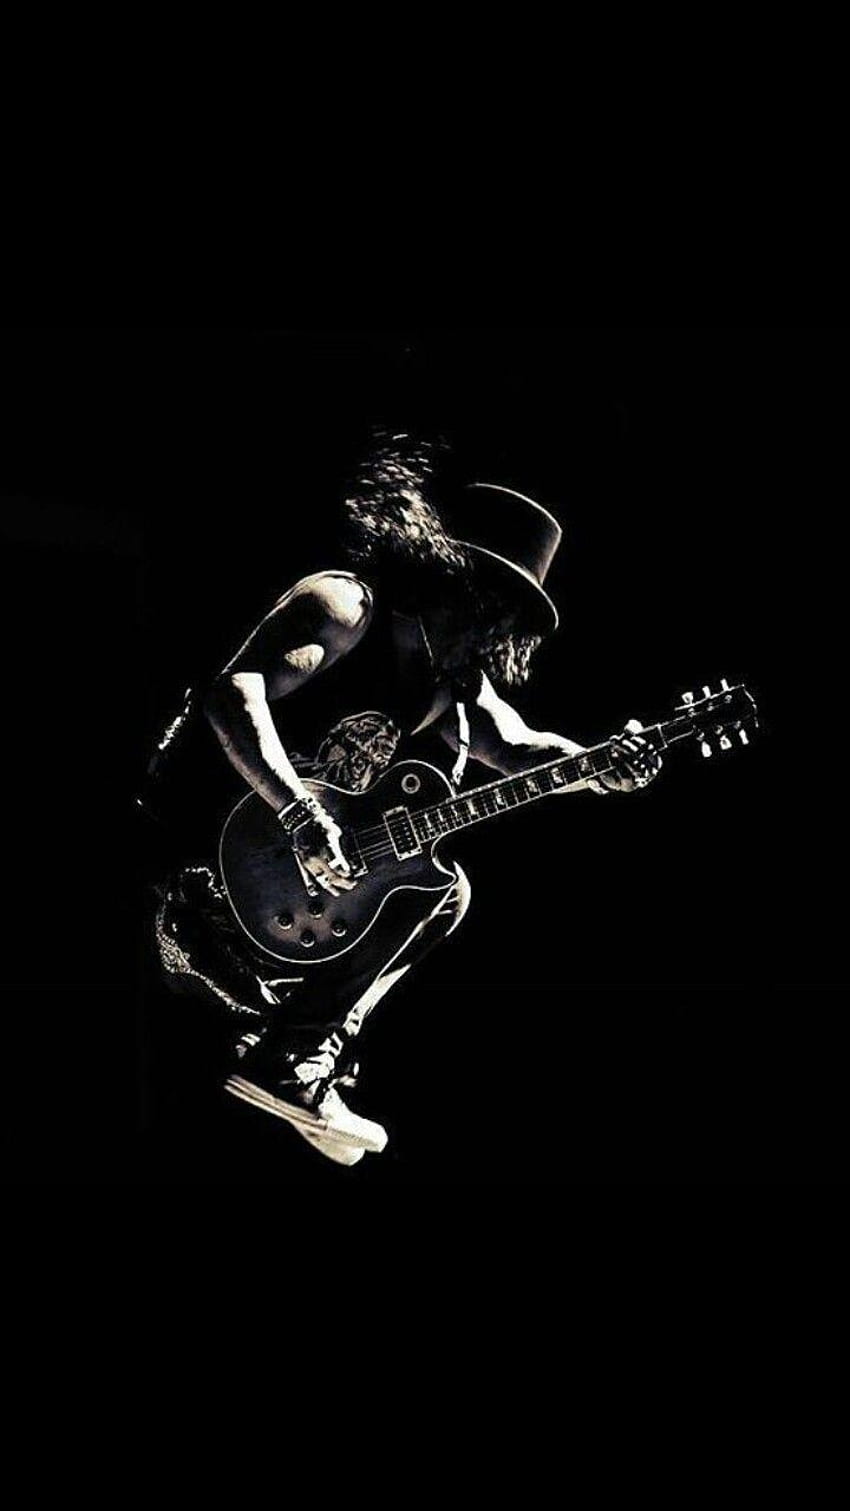 I Love This , When Guitarists Jumping From Heights And Still, slash guns n roses HD電話の壁紙